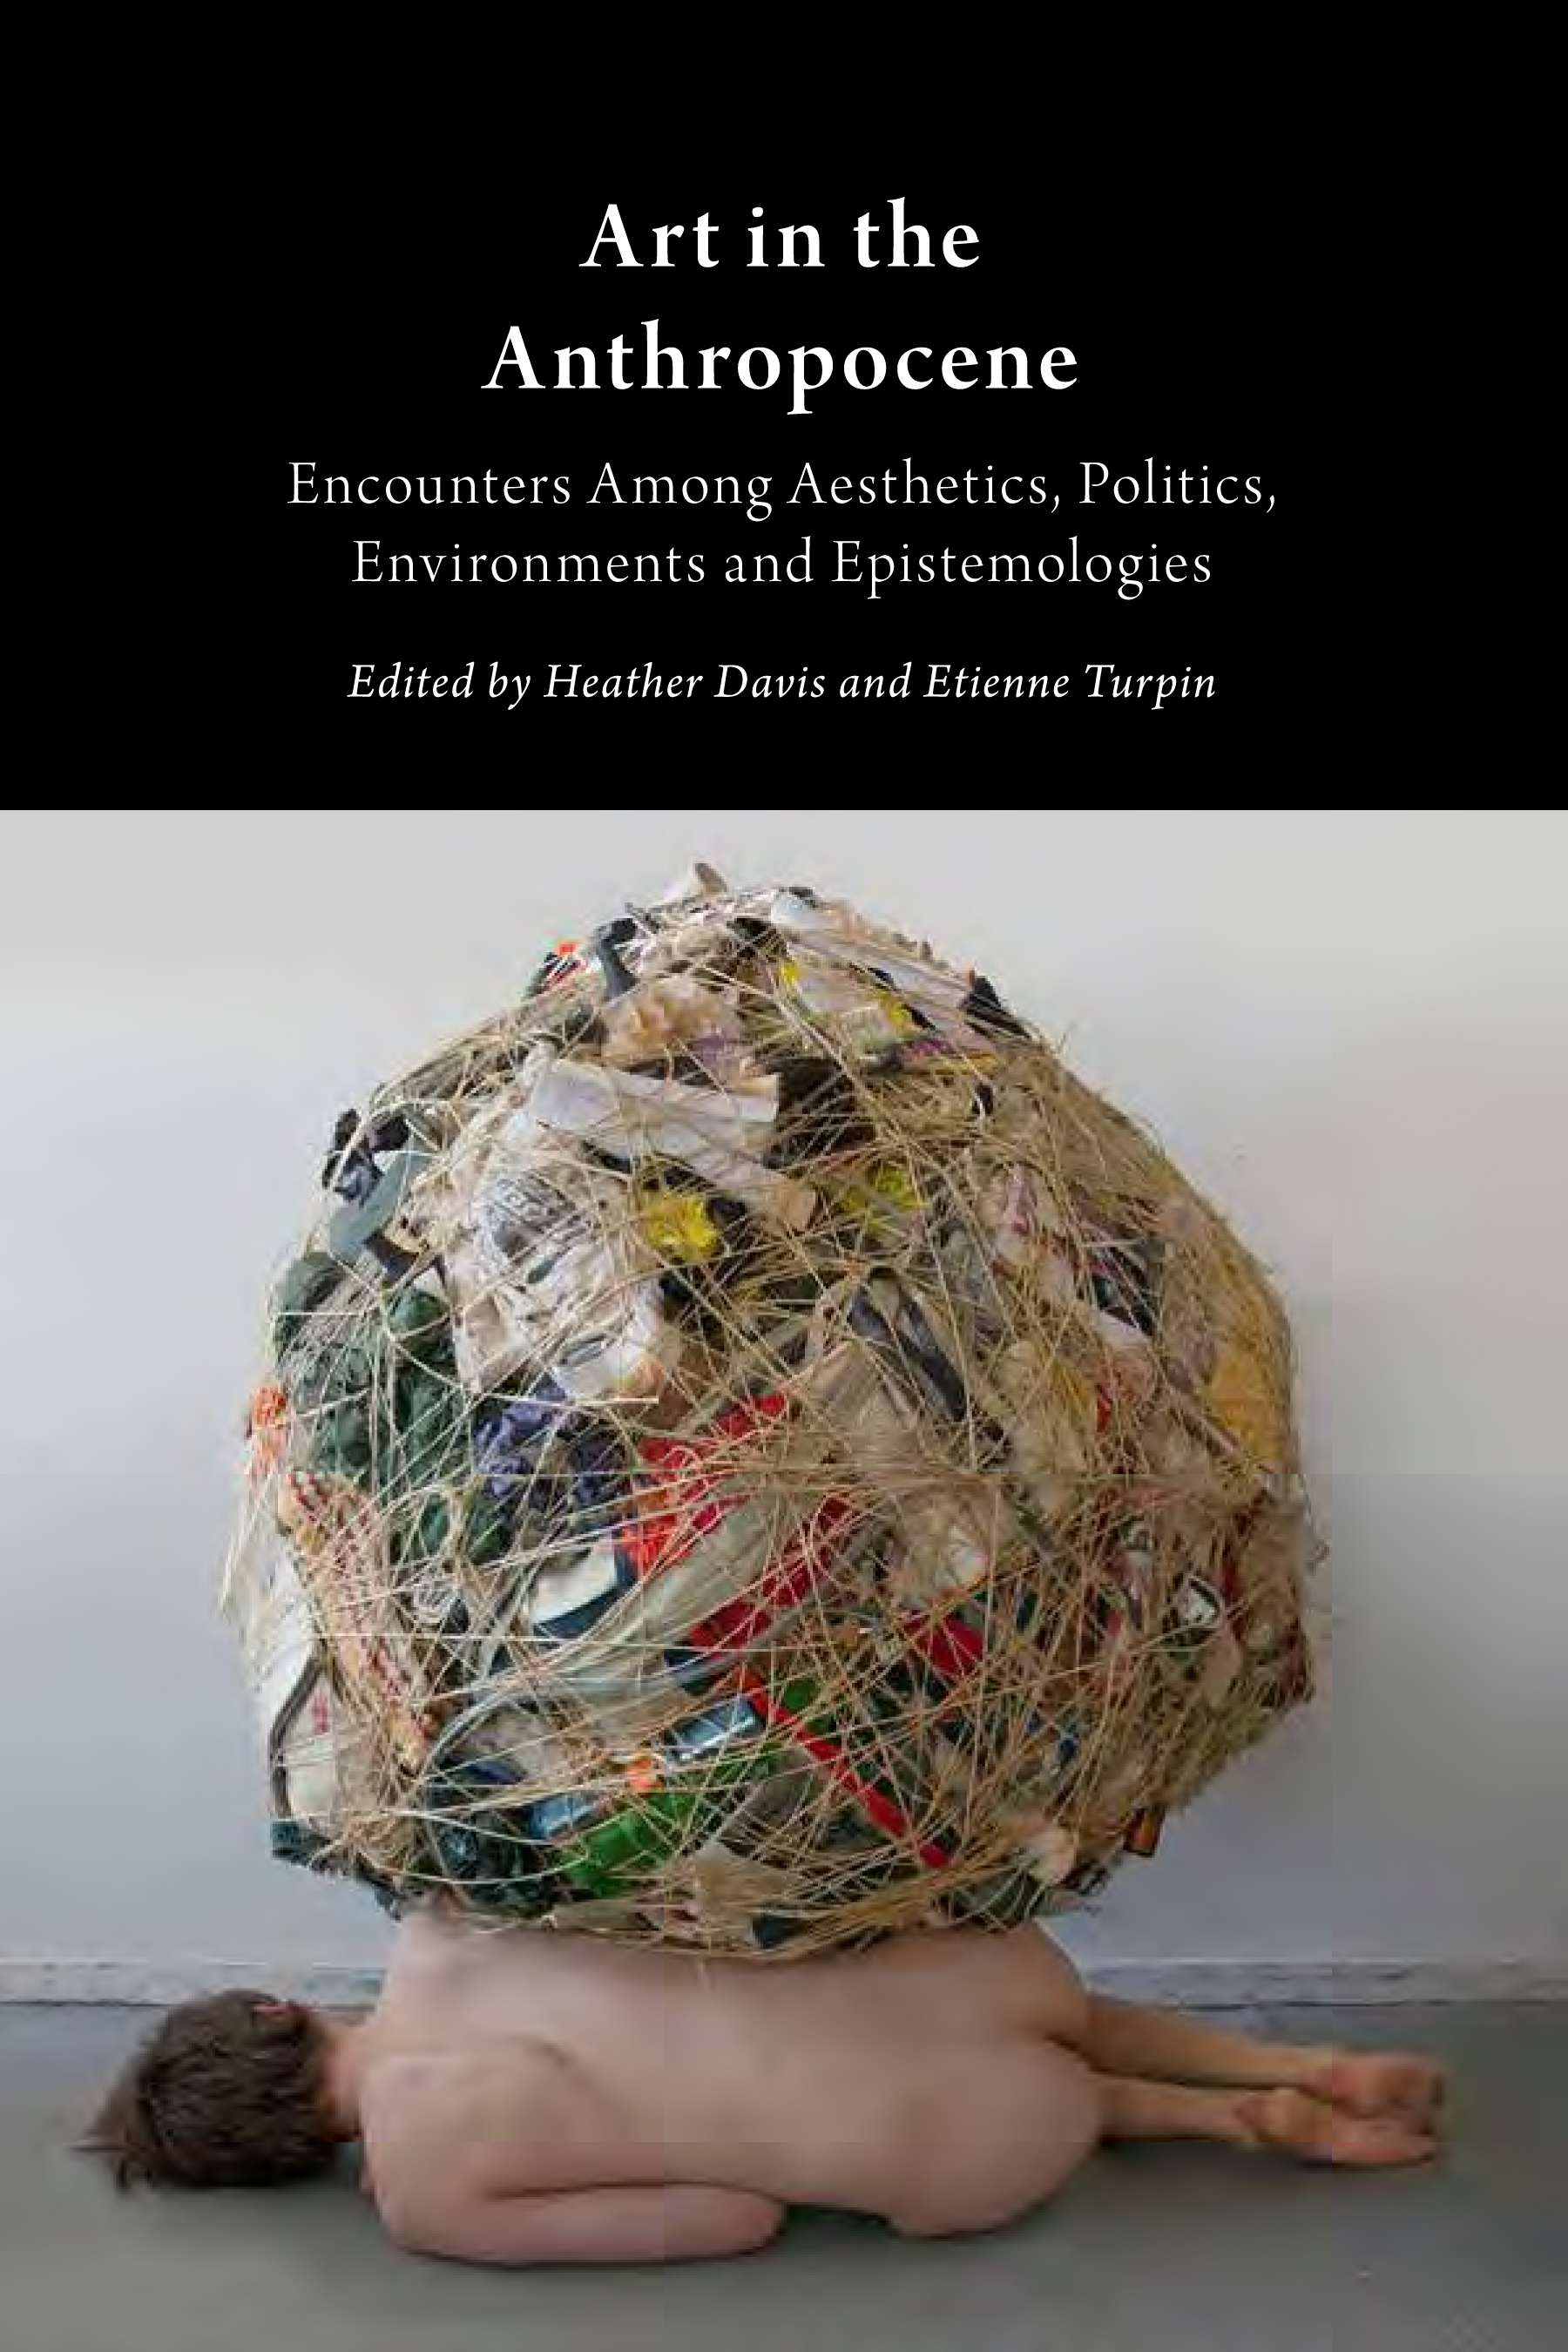 Policies for Adapting to the 'New Normal' of the Anthropocene - By ...